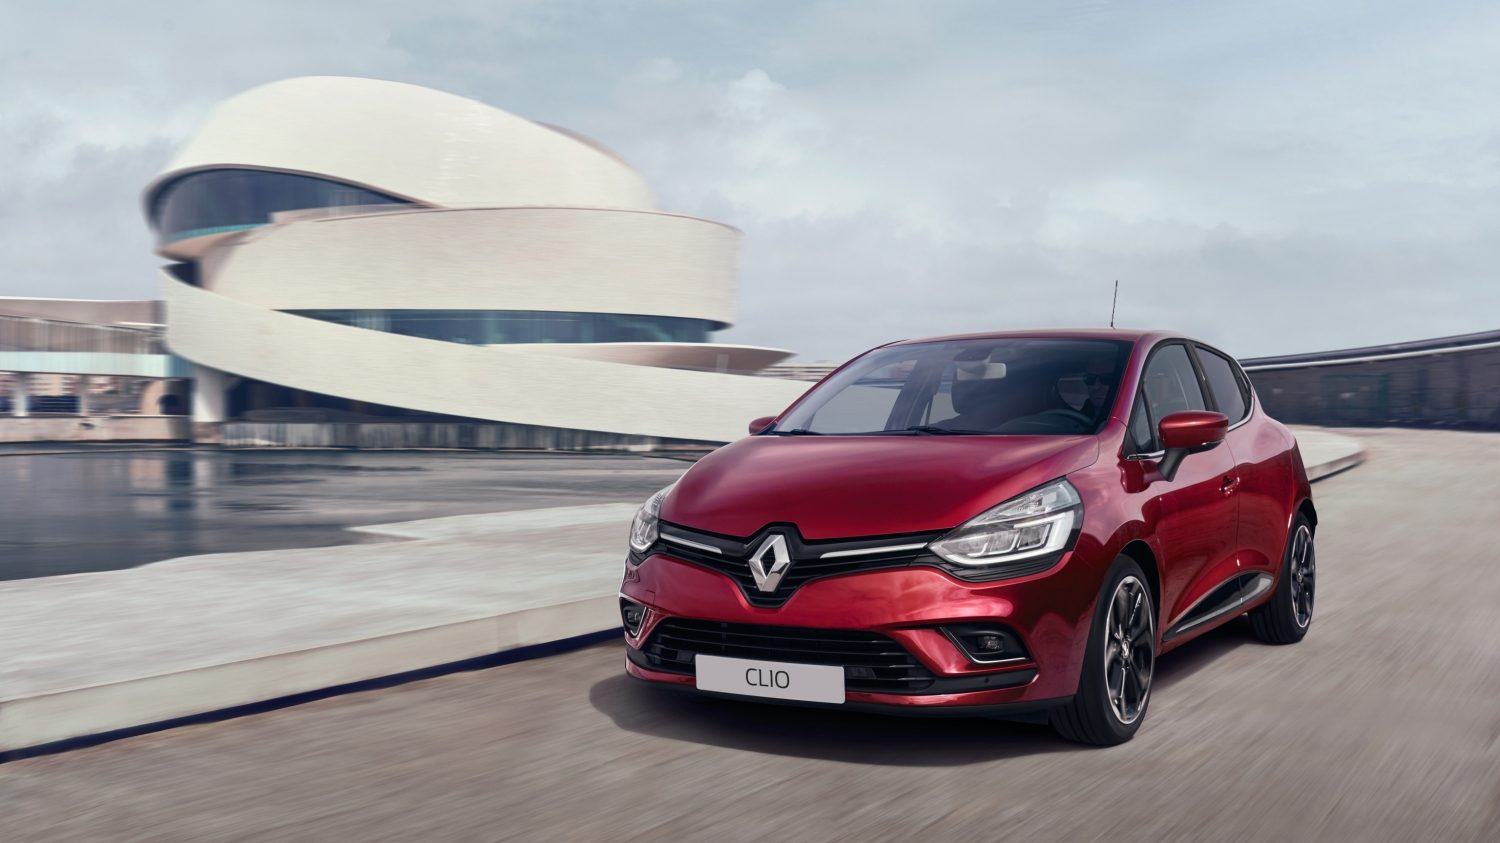 HQ Renault Clio Wallpapers | File 123.07Kb